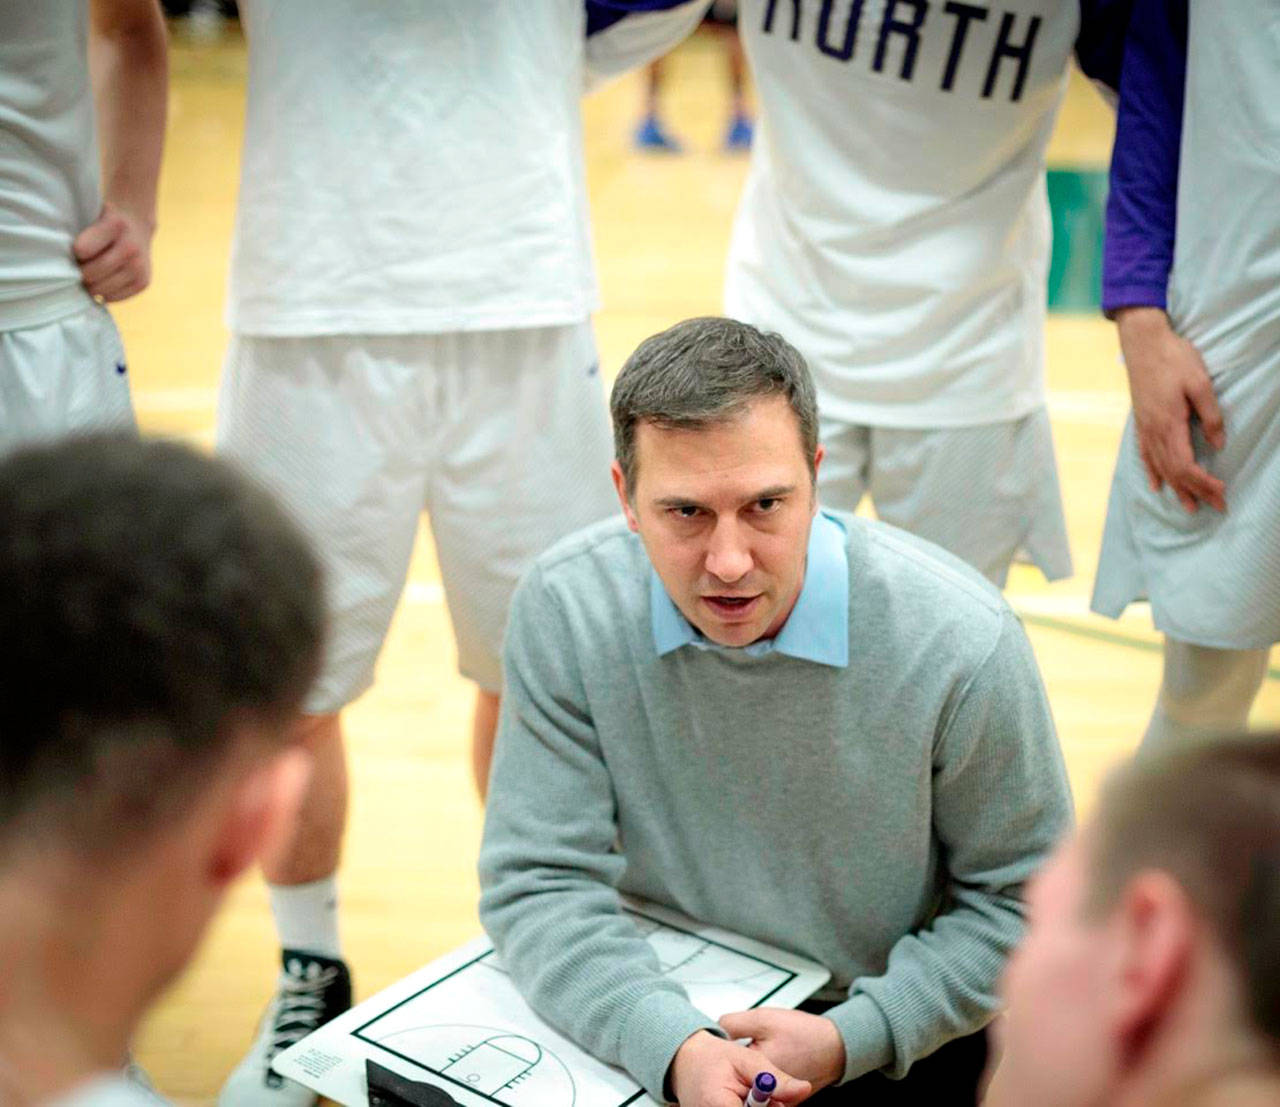 Scott Orness was named Boys Basketball Coach of the Year for the Northwest region after winning a state title in March. North Kitsap Herald/File photo